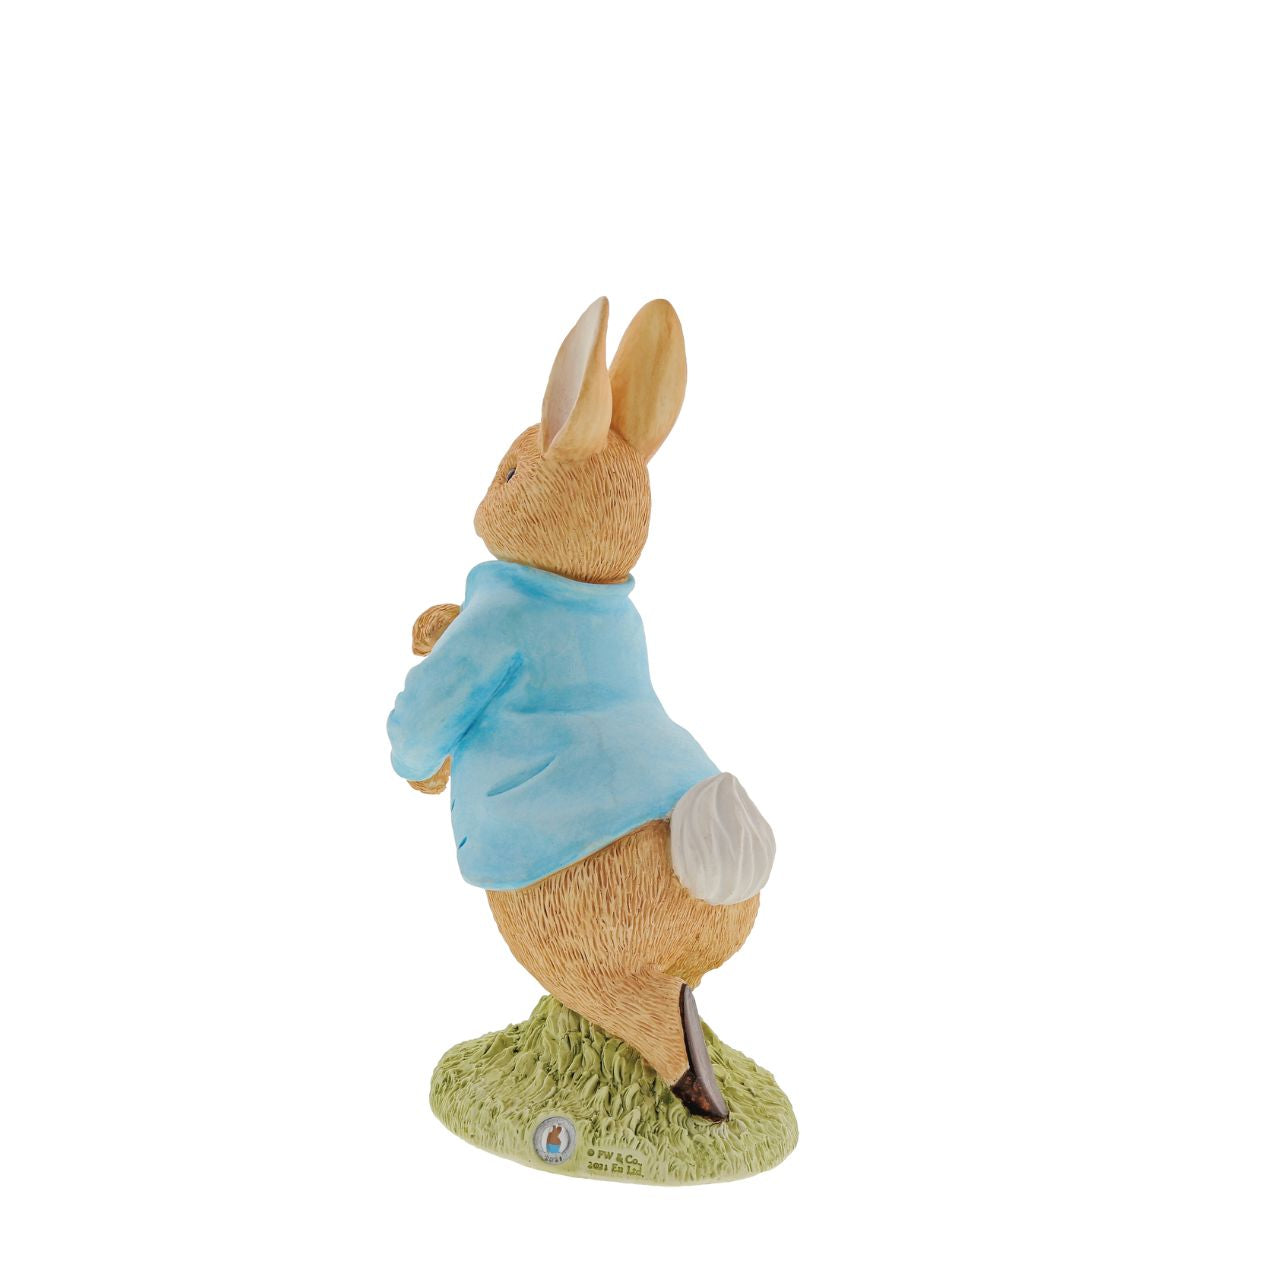 New release, the Peter Rabbit 120th Anniversary Figurine - Limited Edition. This special piece is limited to only 1,200 figurines and has been developed for the anniversary.